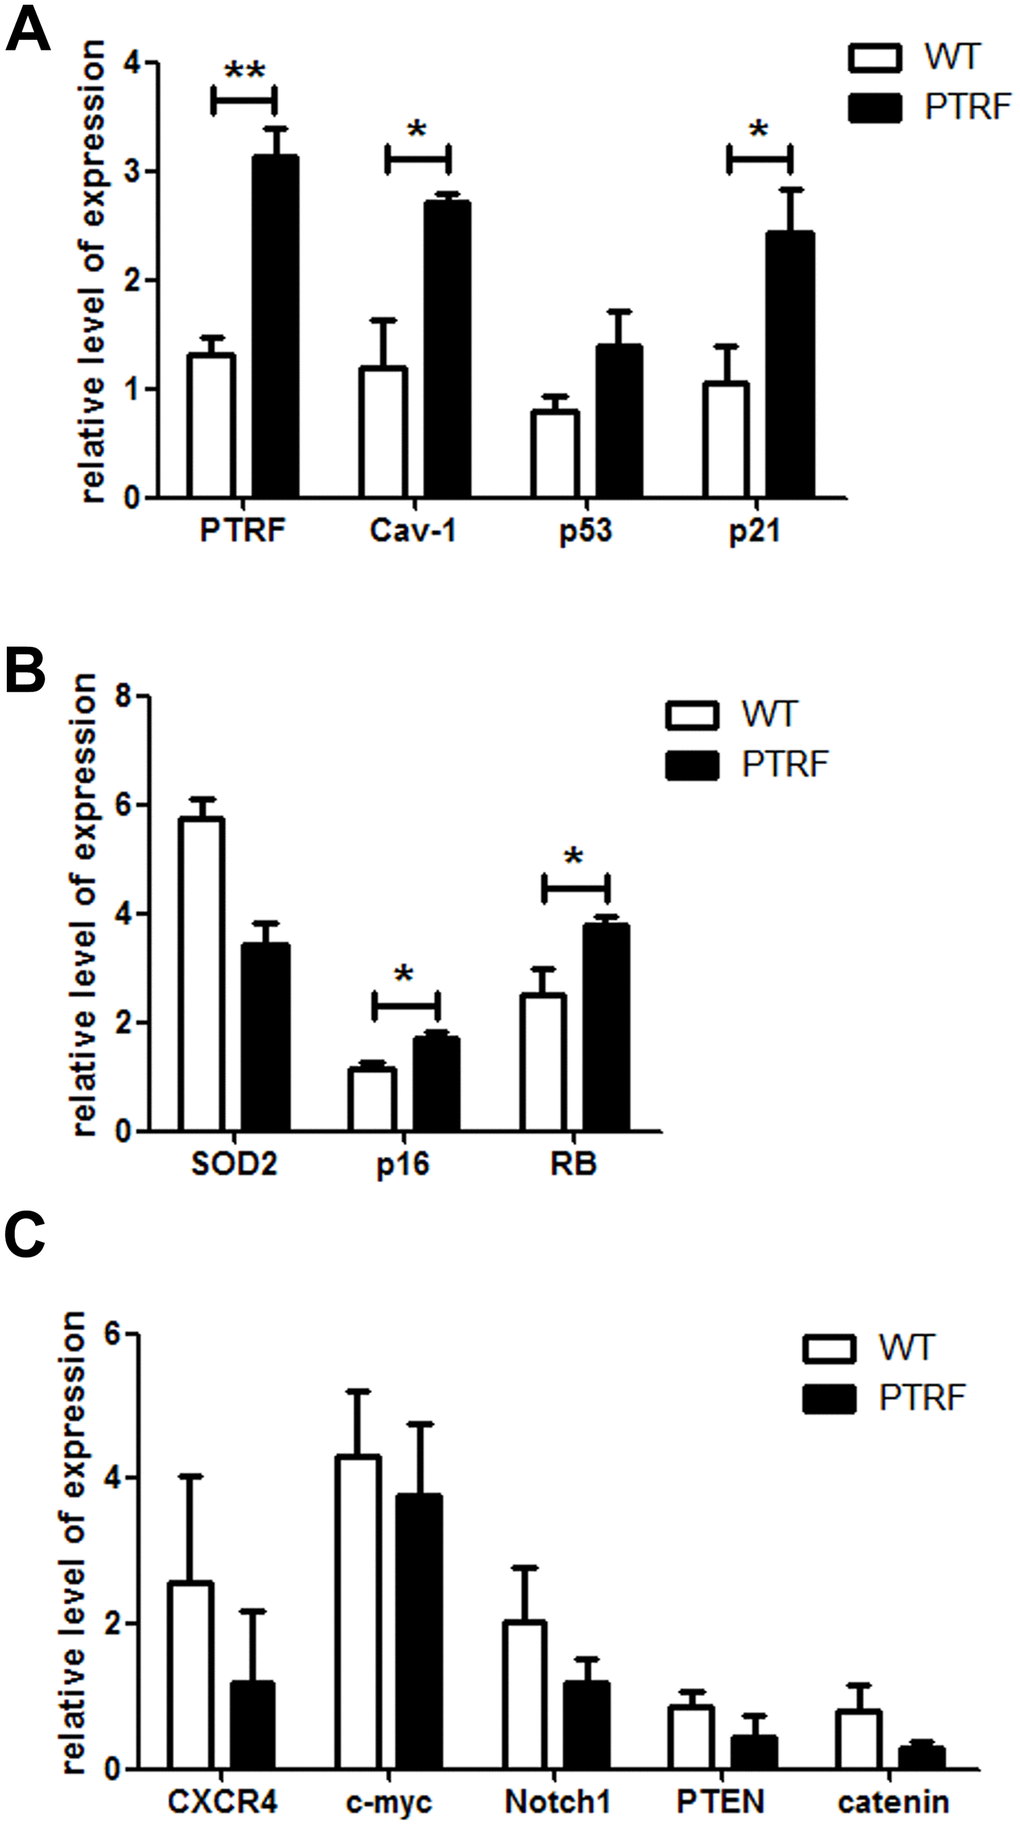 PTRF altered the expression pattern of senescence-associated genes in LSKs. (A–C) RT-PCR analysis of the indicated genes in sorted LSK cells from PTRF and WT mice. Data represent the mean ± SD of three independent experiments. *, P P 